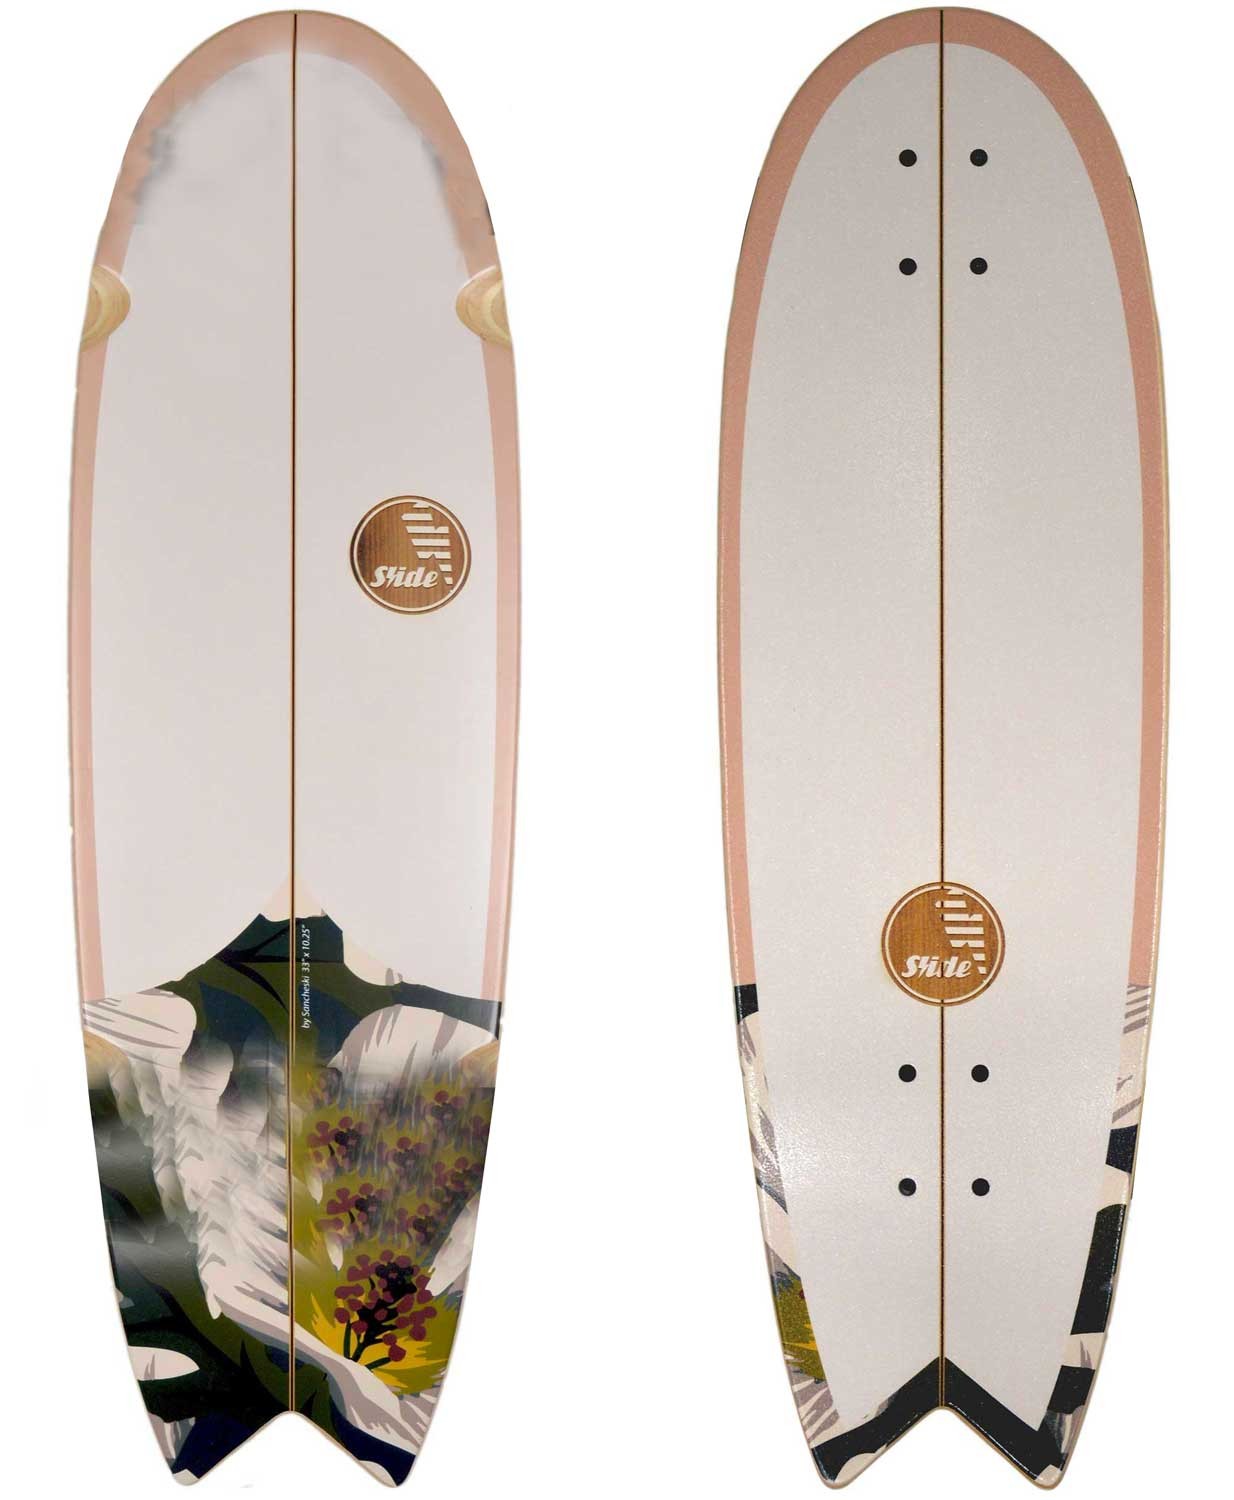 Planches nues Slide Surfskates